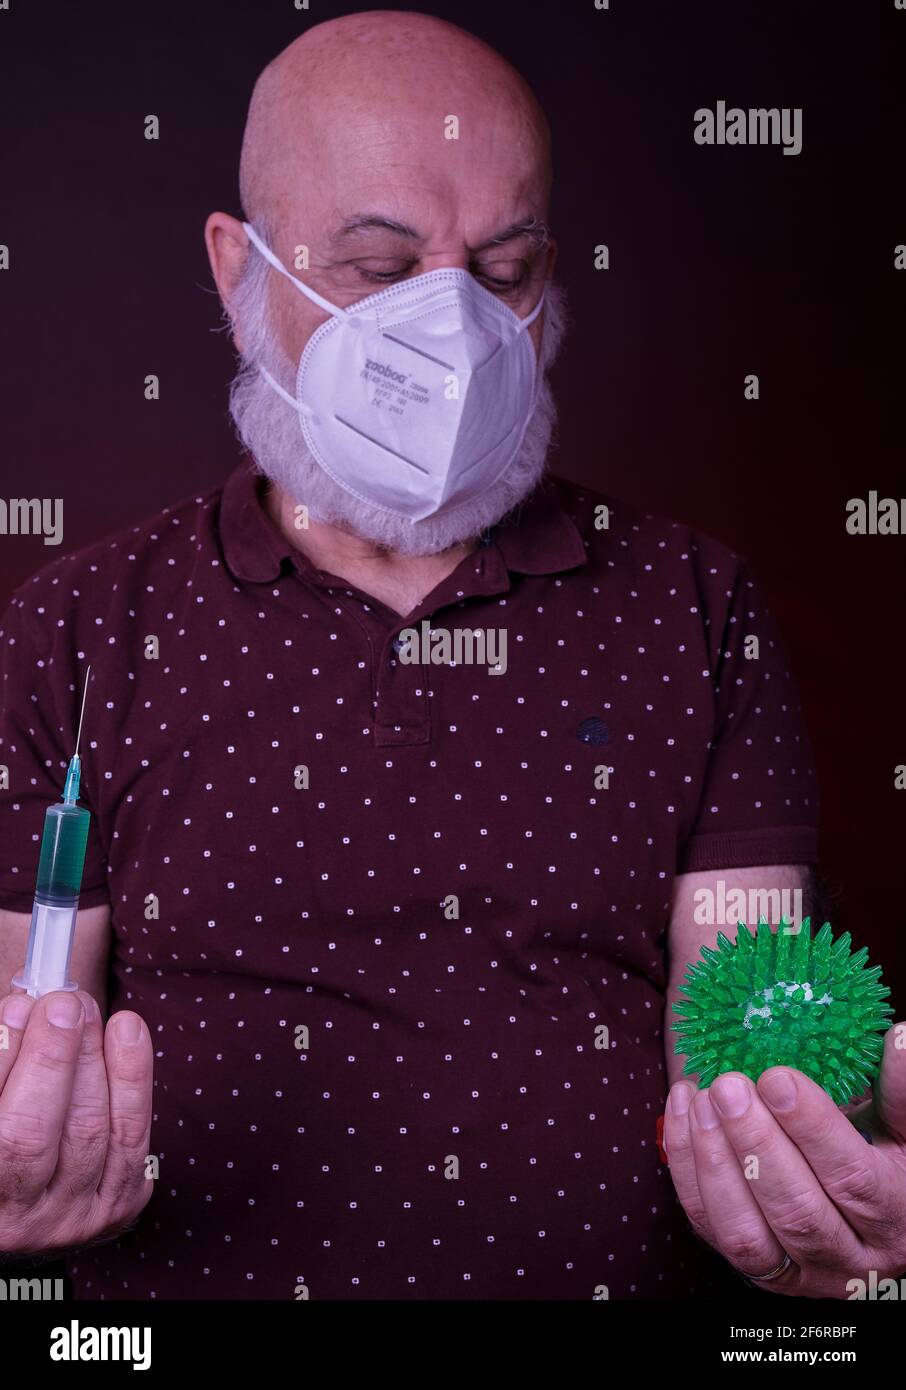 senior man with protective mask holds a vaccine syringe in one hand and a green ball representing the corona virus in another Stock Photo